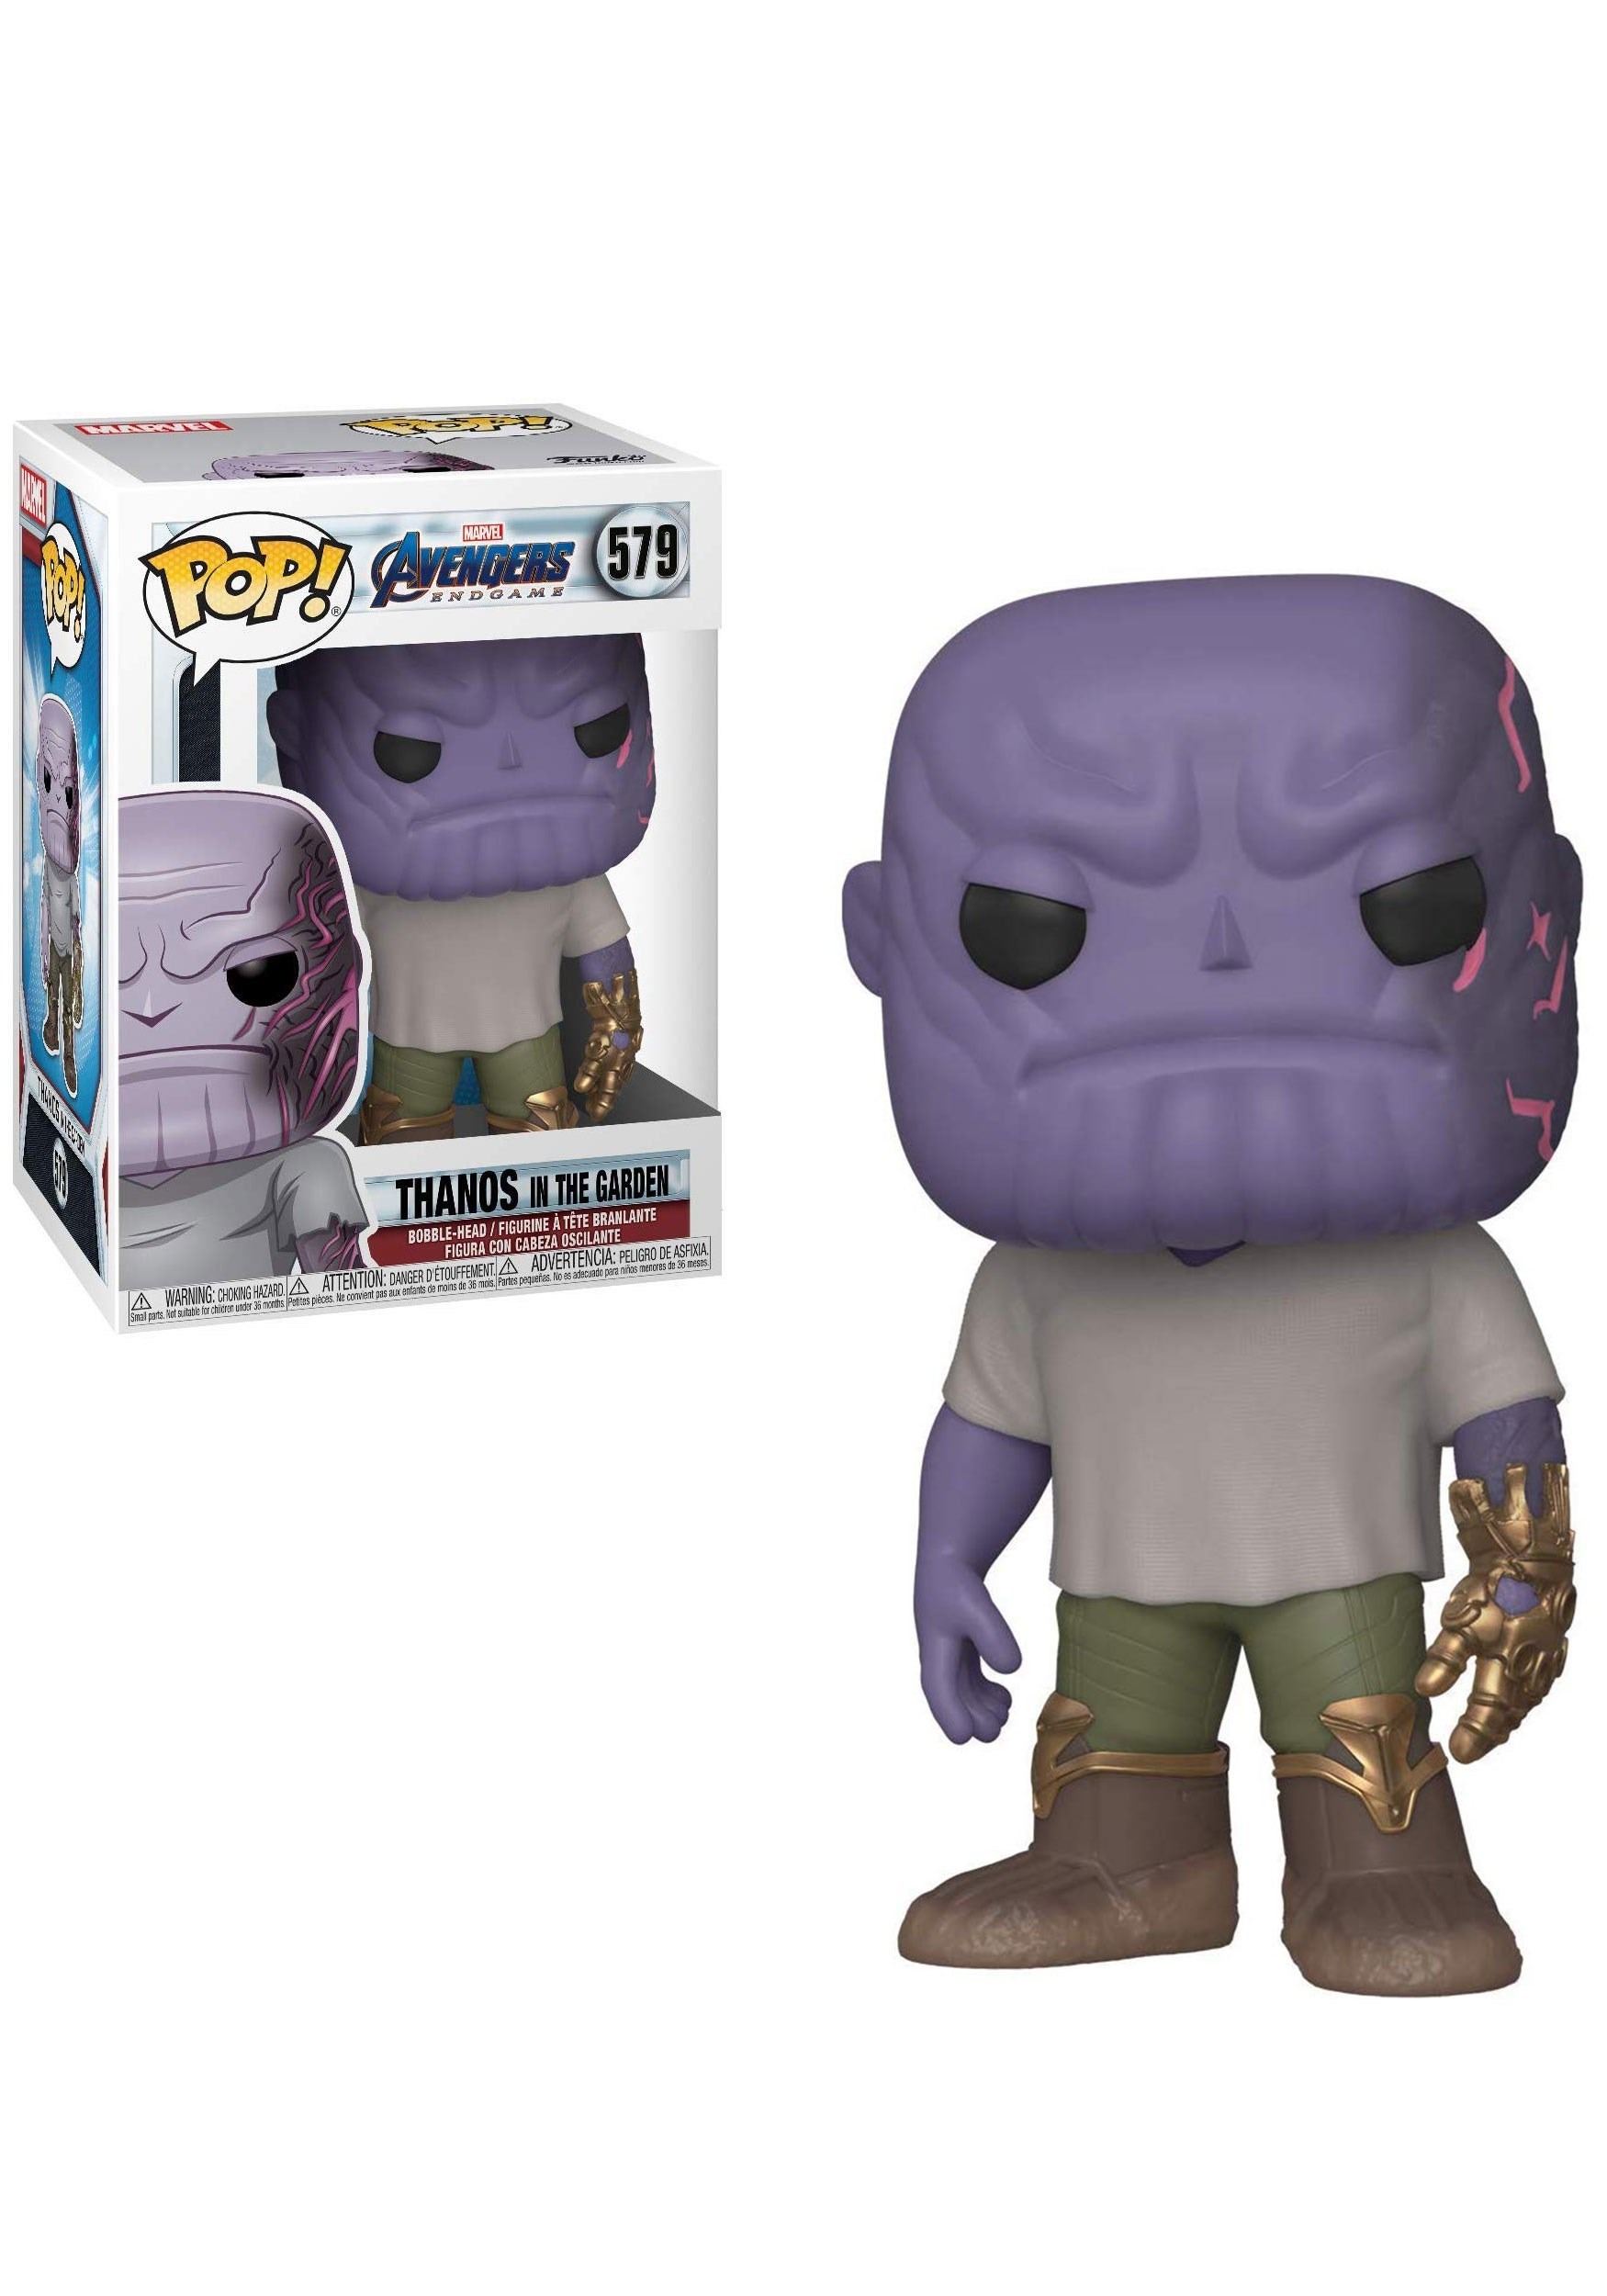 Funko POP! Marvel: Endgame - Casual Thanos with Gauntlet Figure